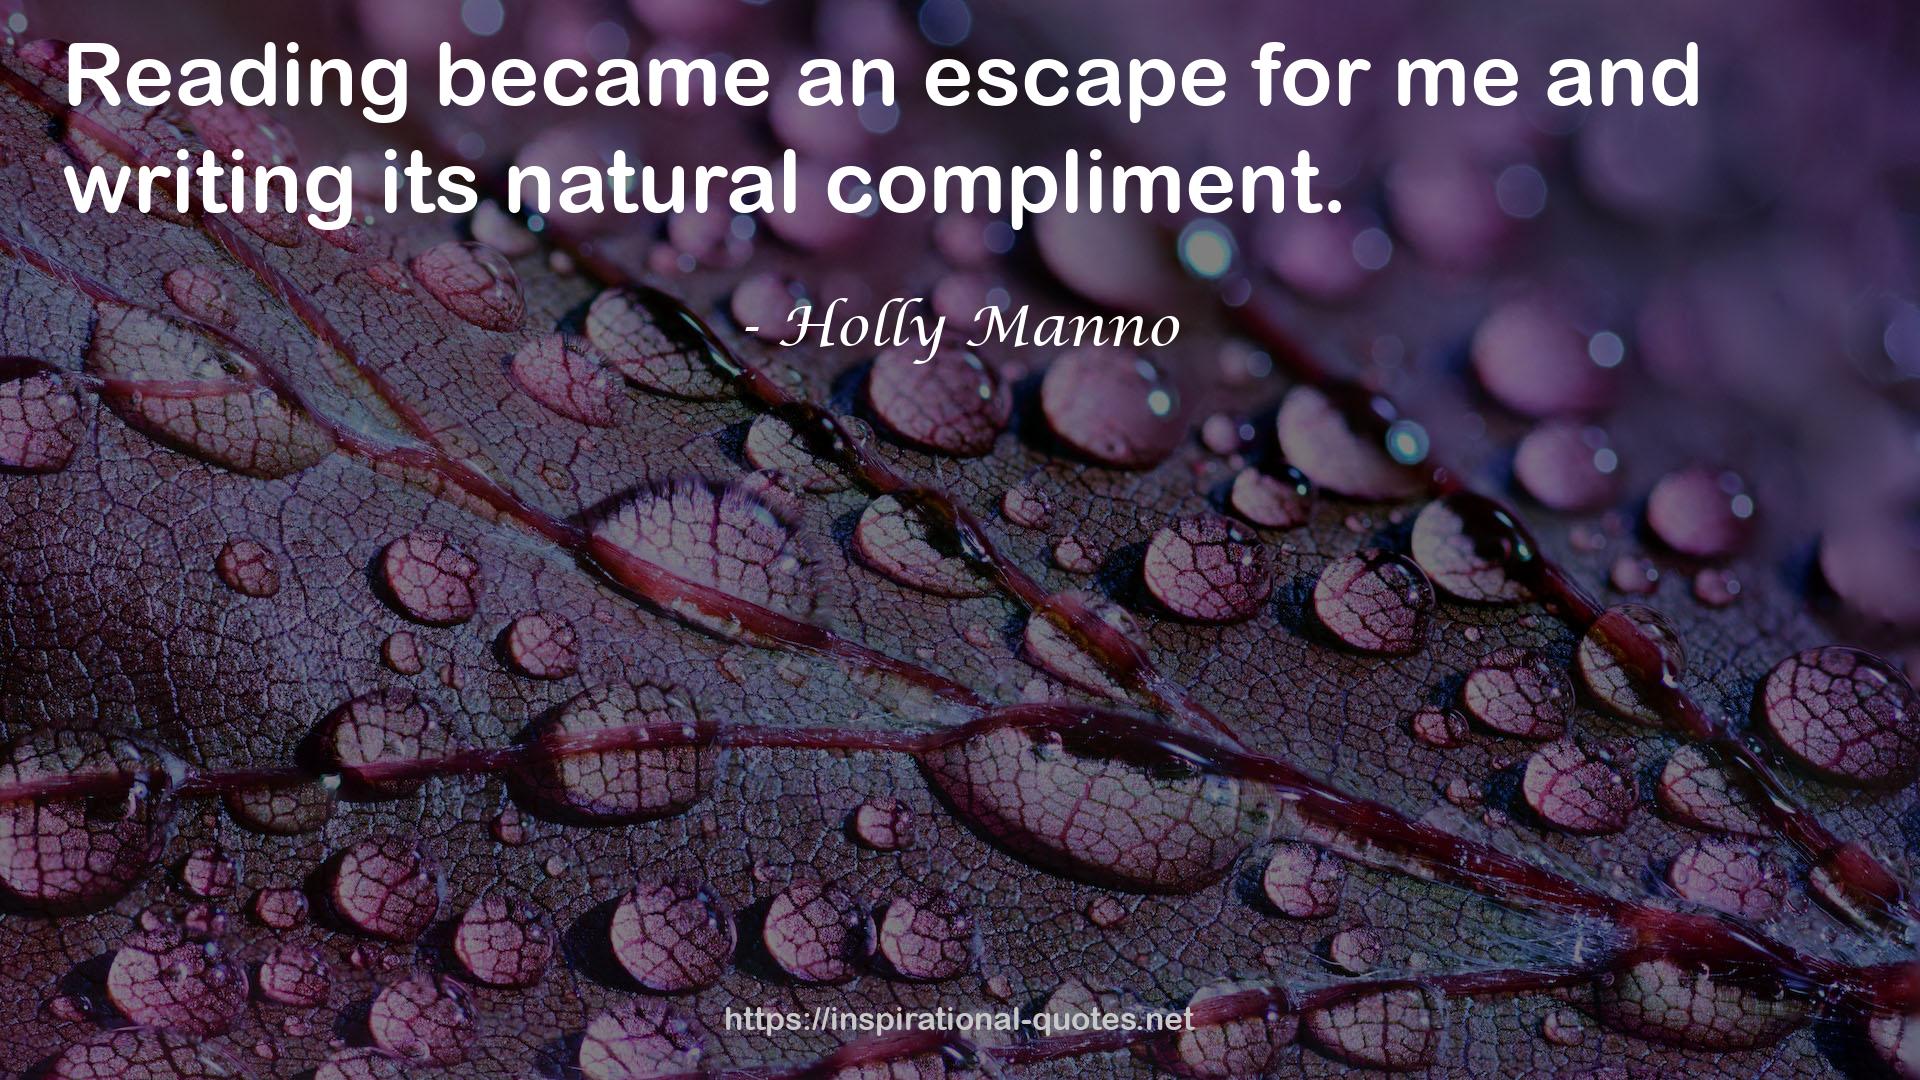 Holly Manno QUOTES